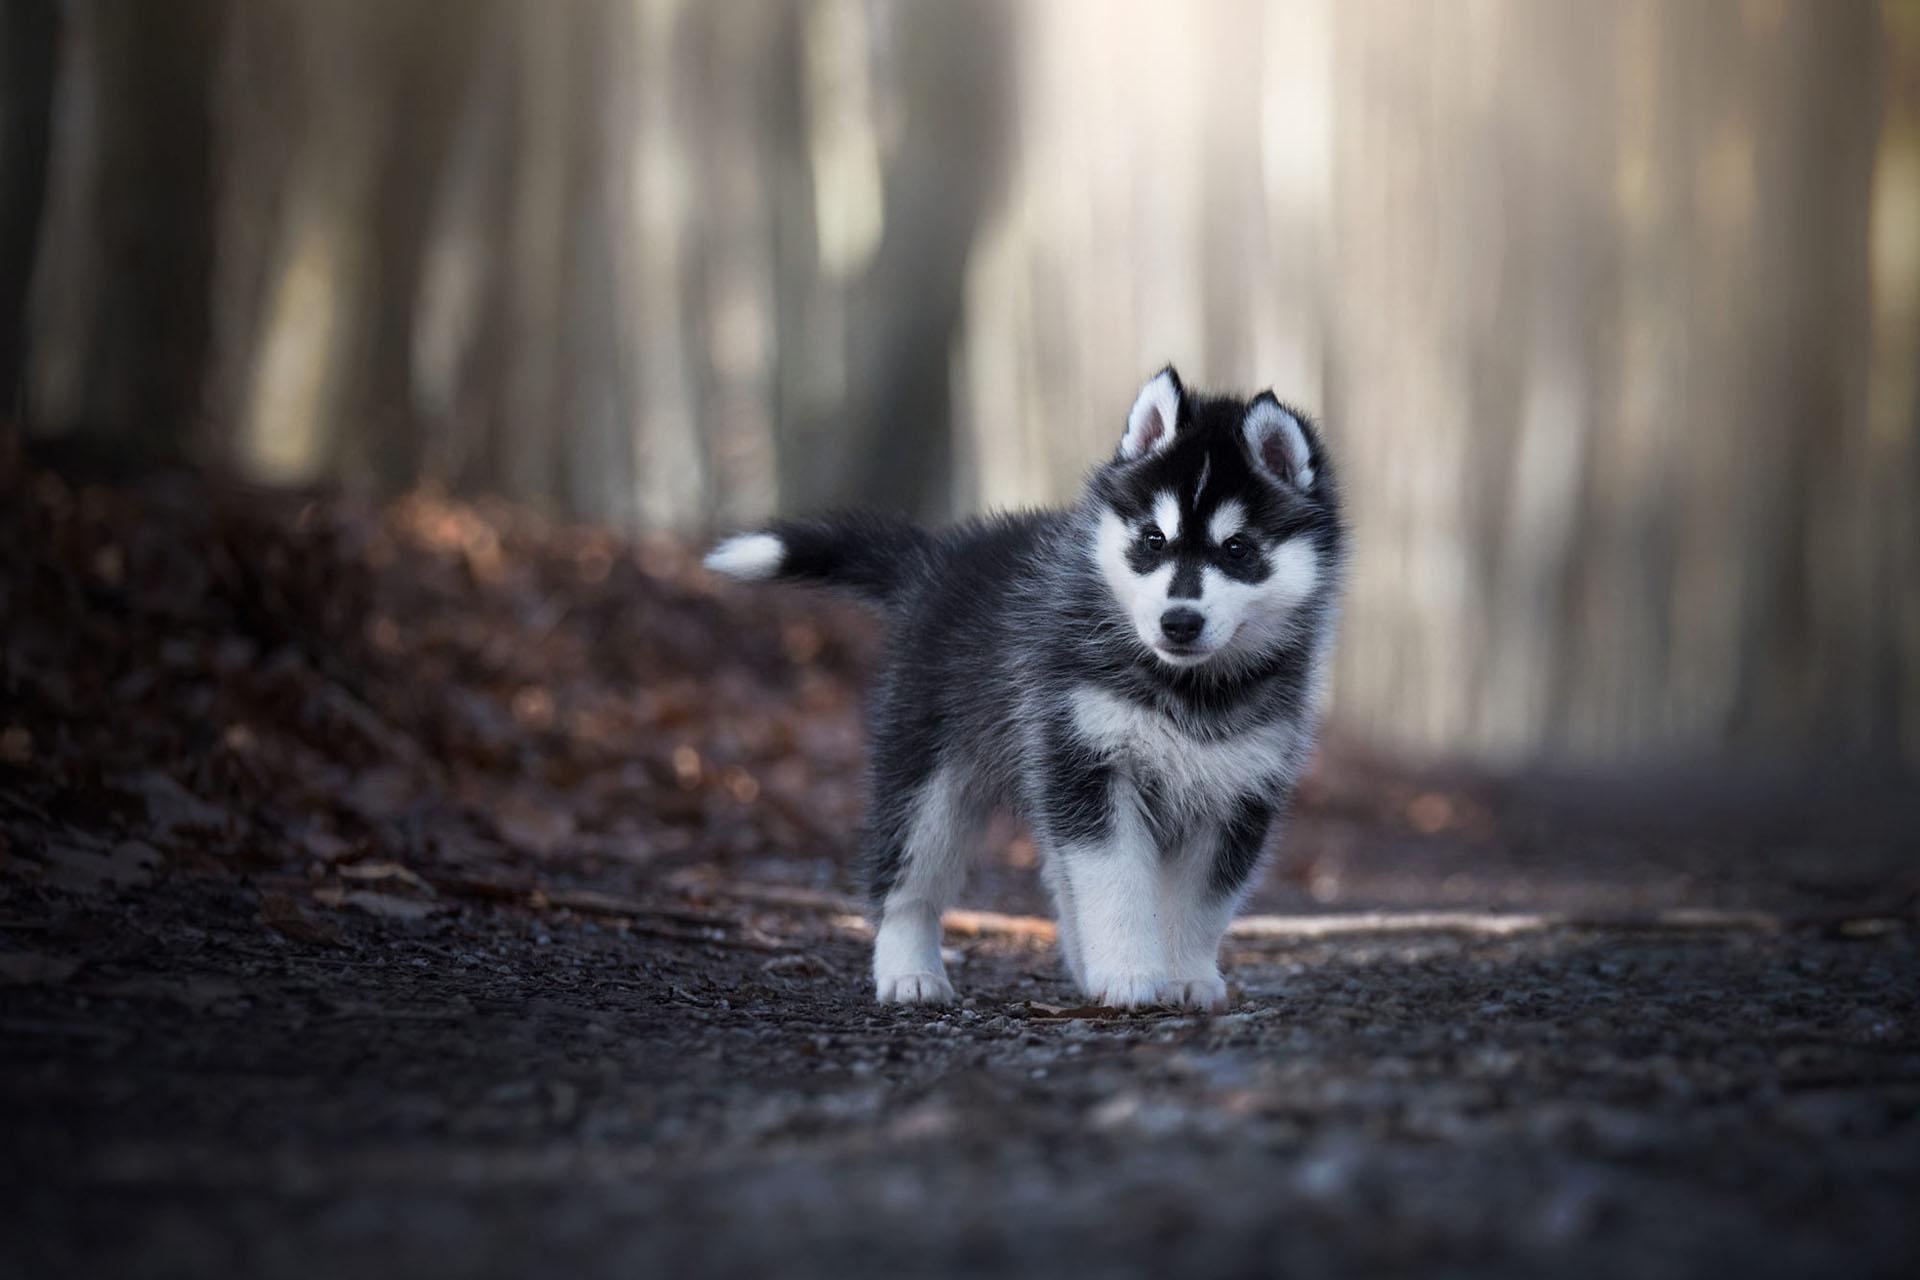 Husky Dog Wallpaper Hd Backgrounds Themes For Android Apk